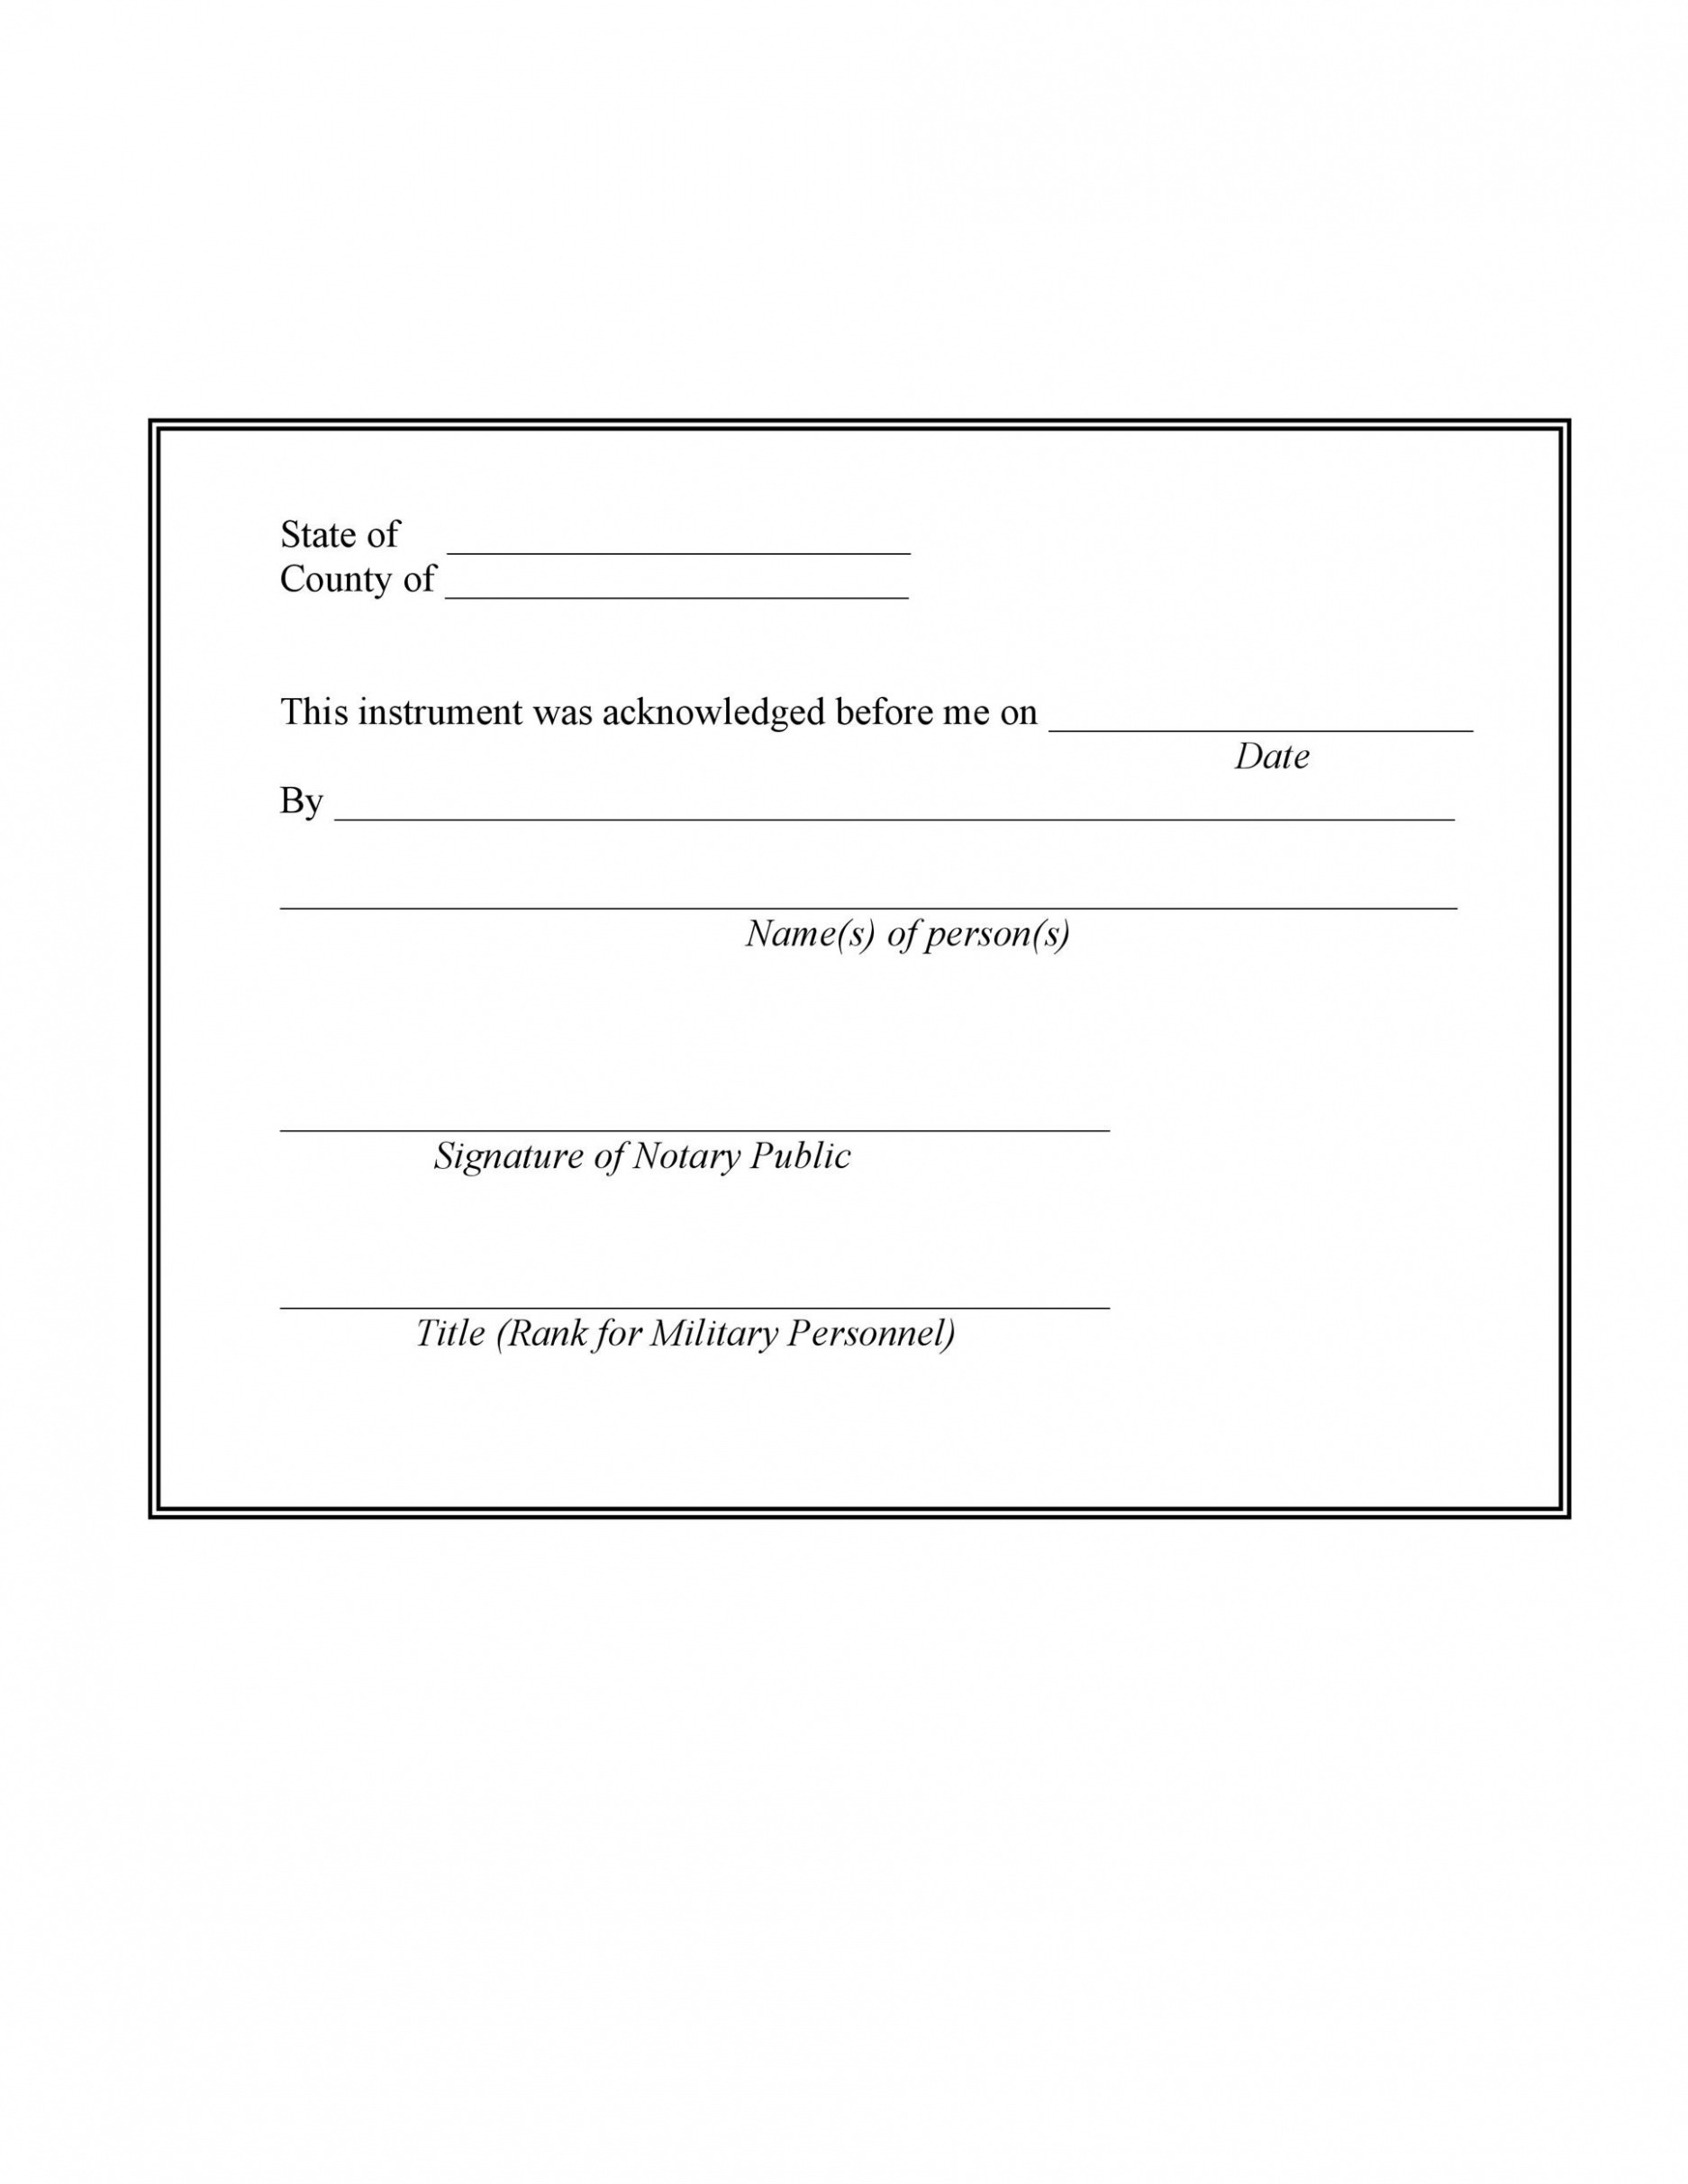 Sample Notary Public Document Template Sample